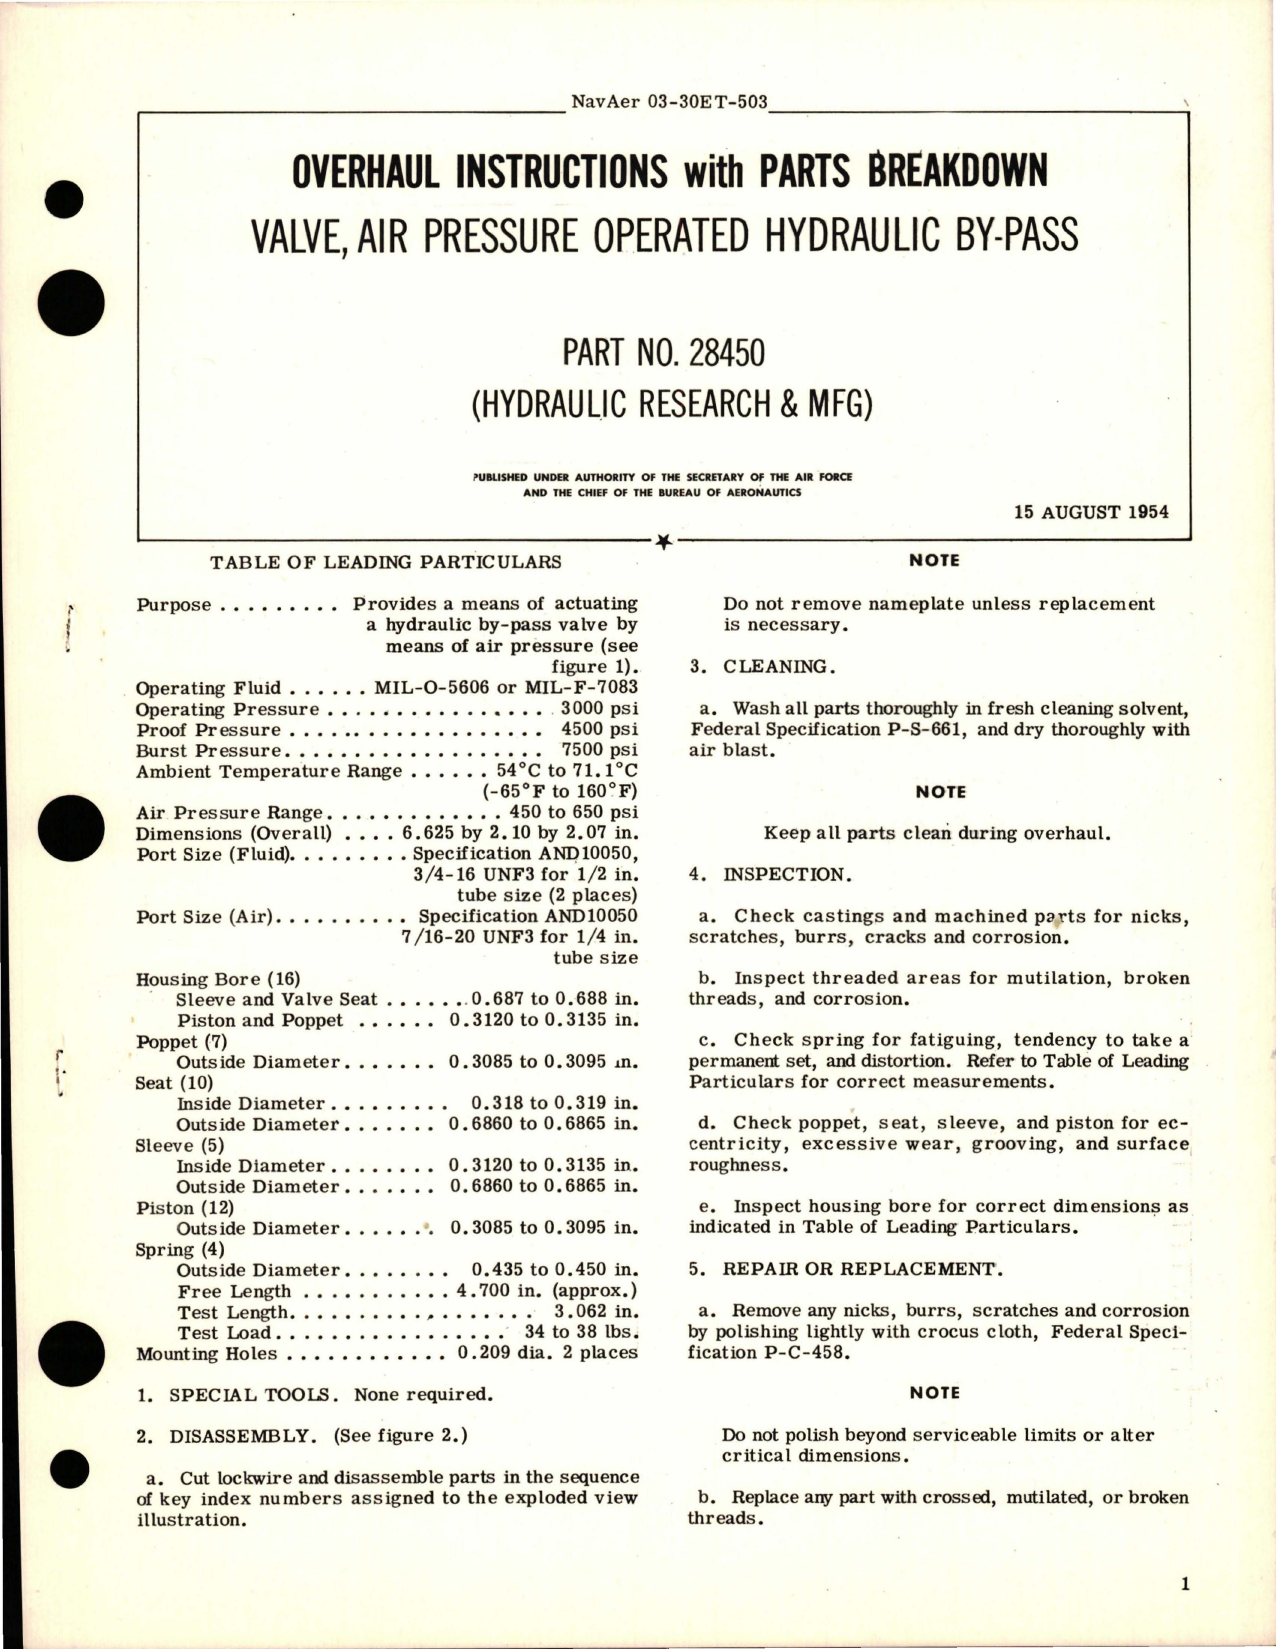 Sample page 1 from AirCorps Library document: Overhaul Instructions with Parts Breakdown for Air Pressure Operated Hydraulic By-Pass Valve - Part 28450